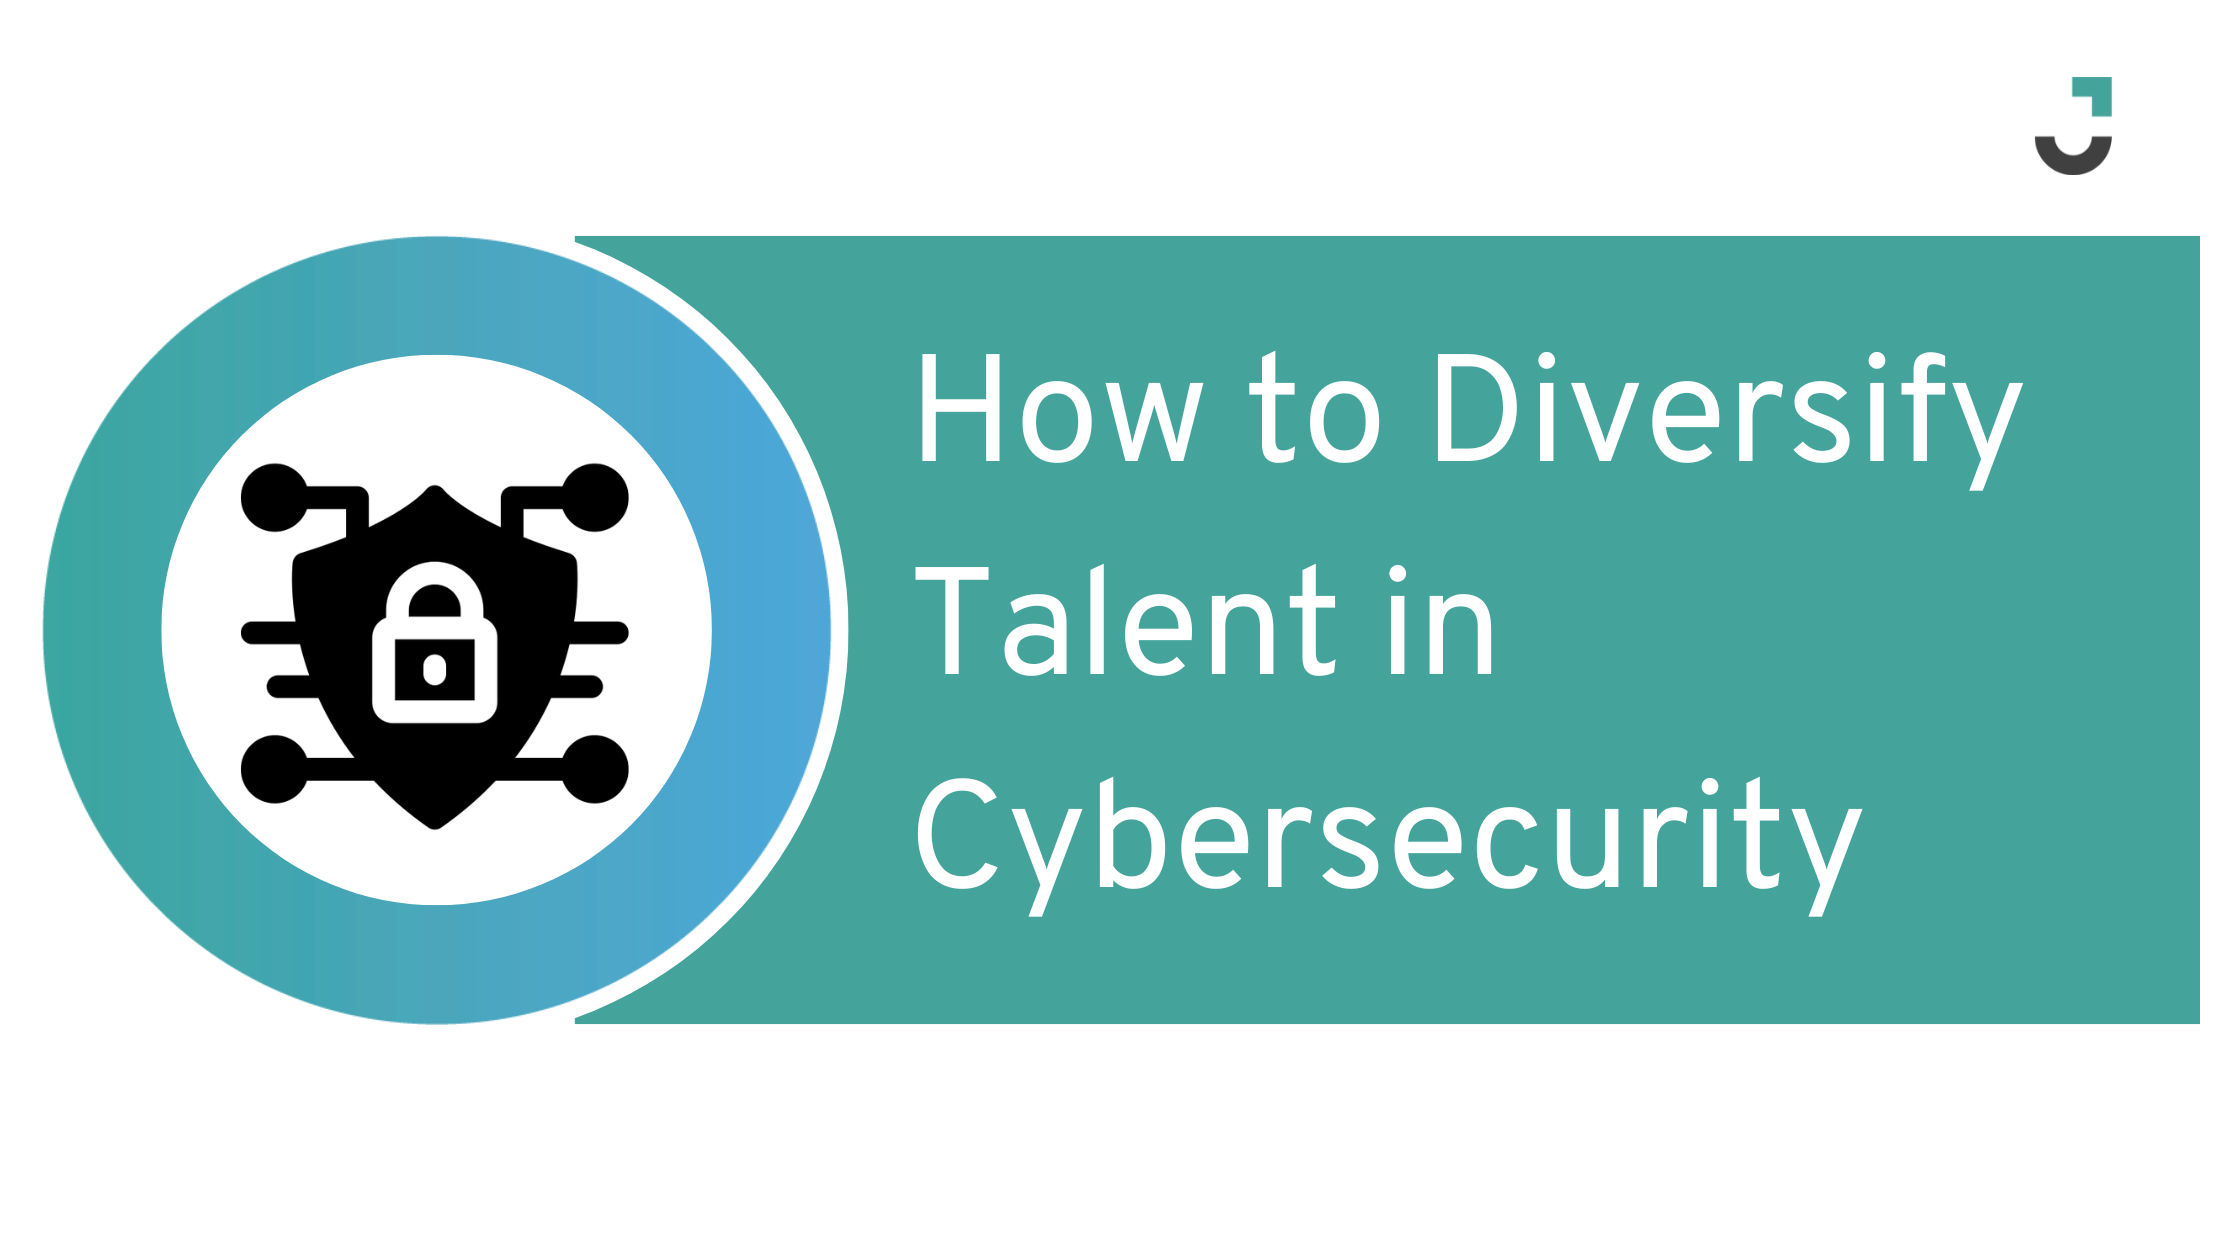 How to Diversify Talent in Cybersecurity